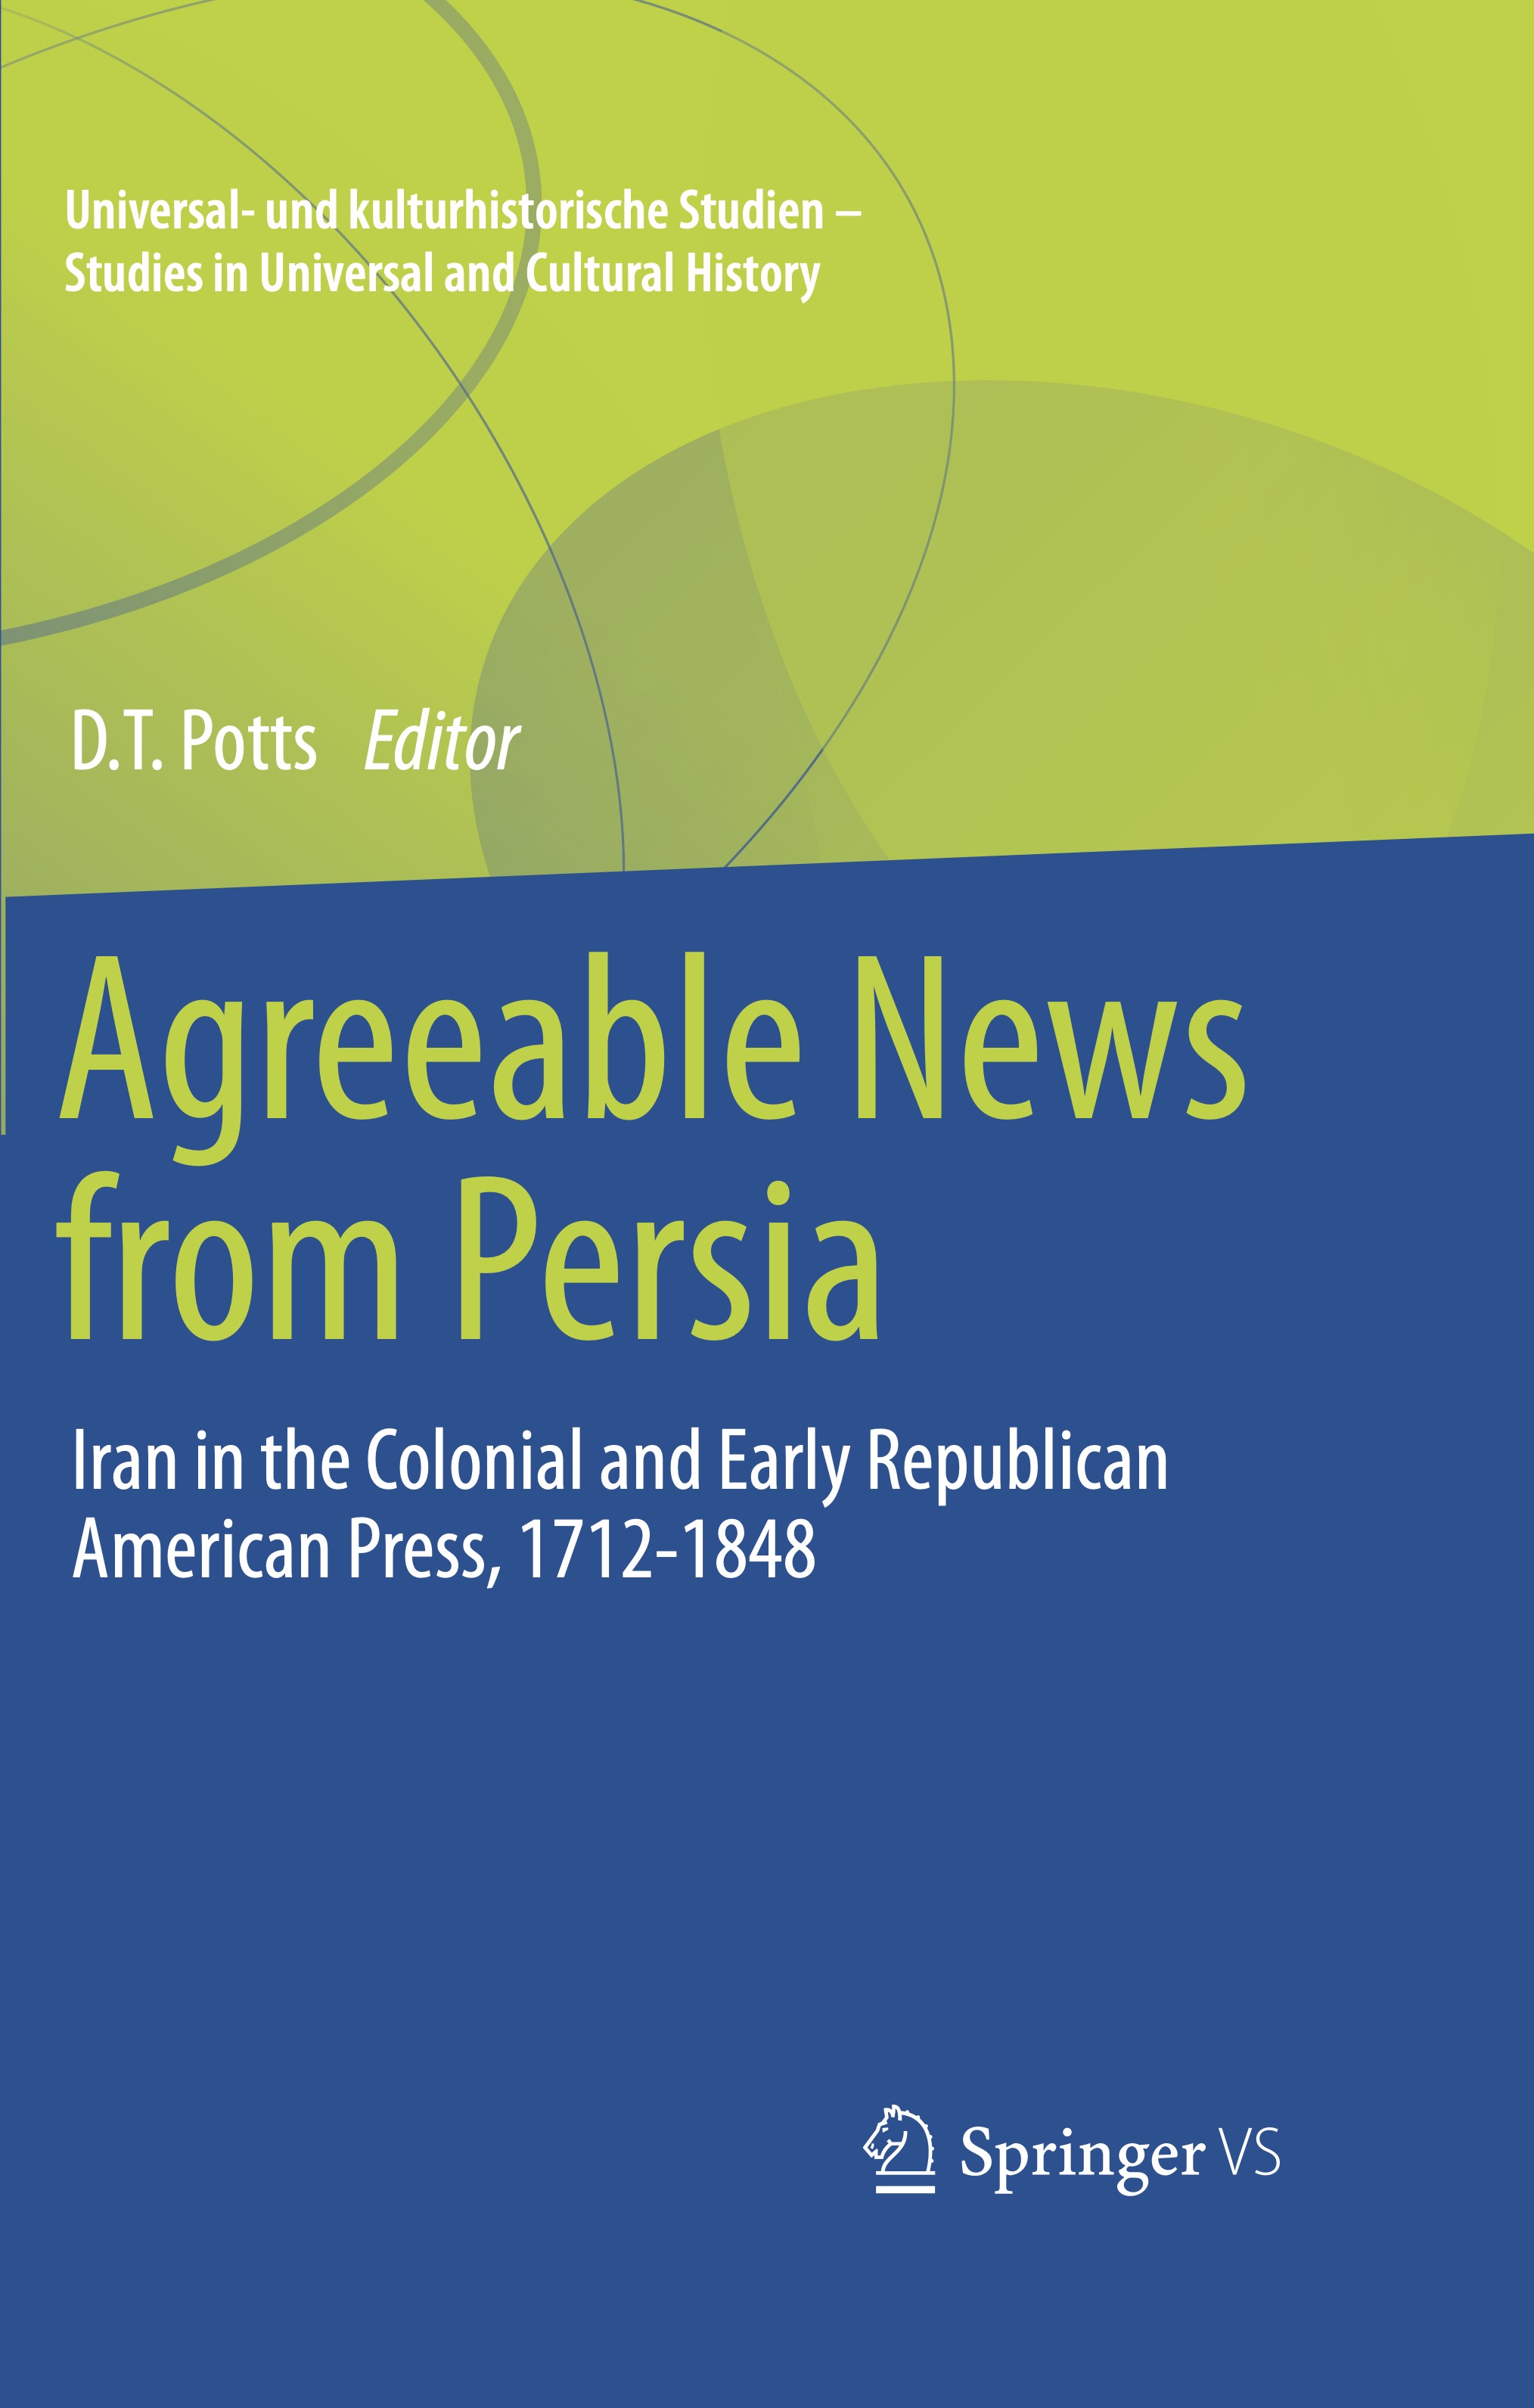 "Agreeable News from Persia" edited by D.T. Potts, ISAW Professor